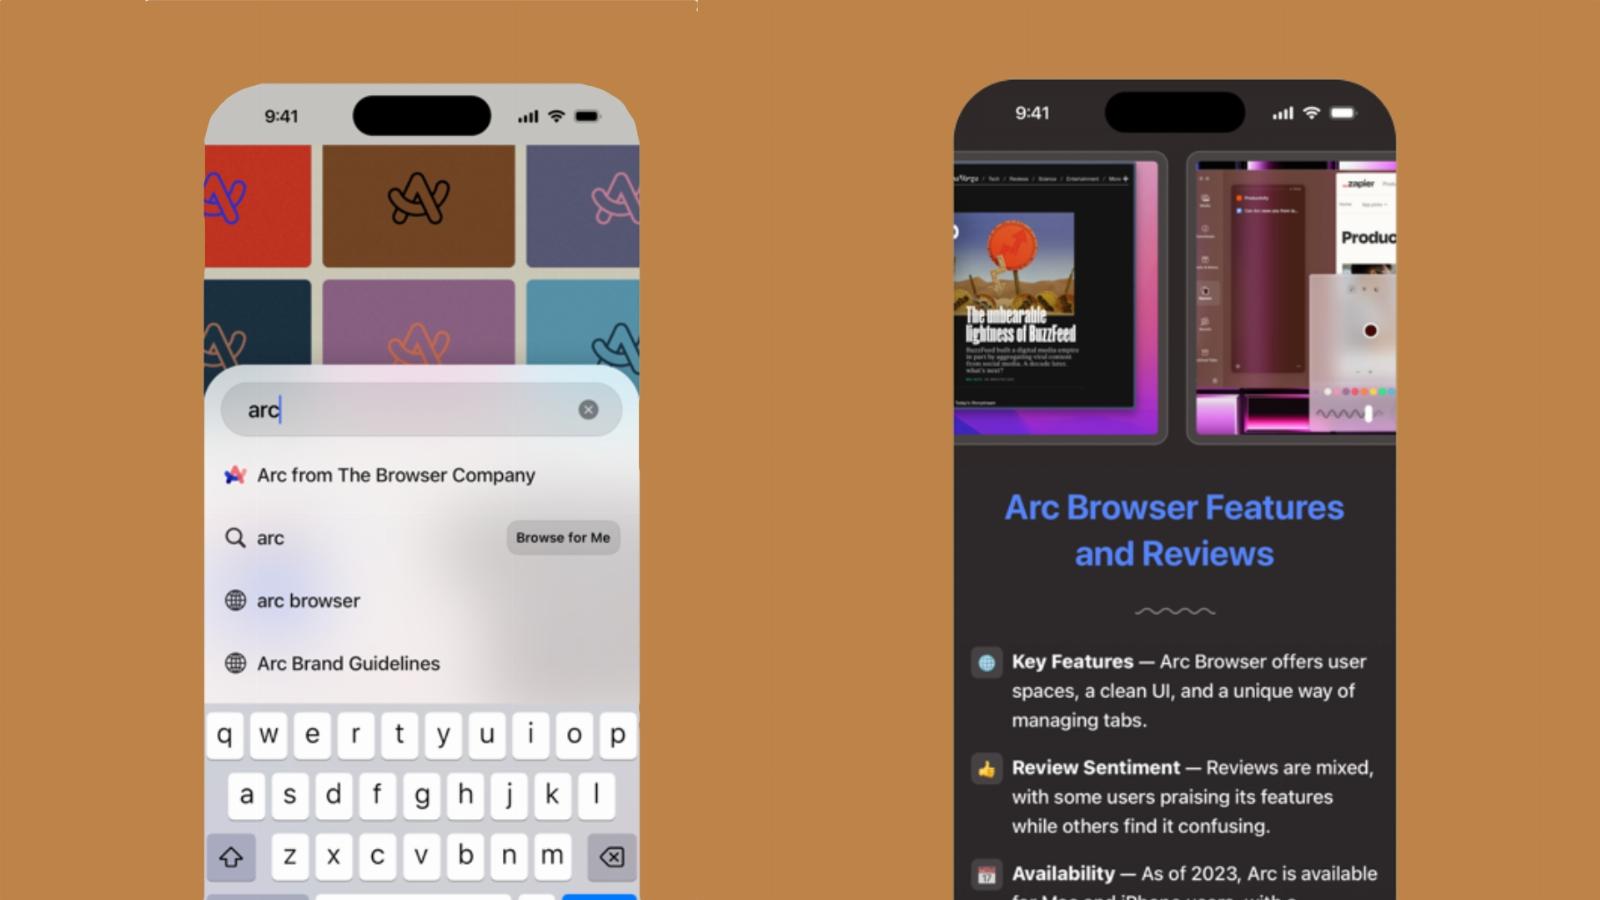 Arc browser’s new AI-powered ‘pinch-to-summarize’ feature is clever, but often misses the mark